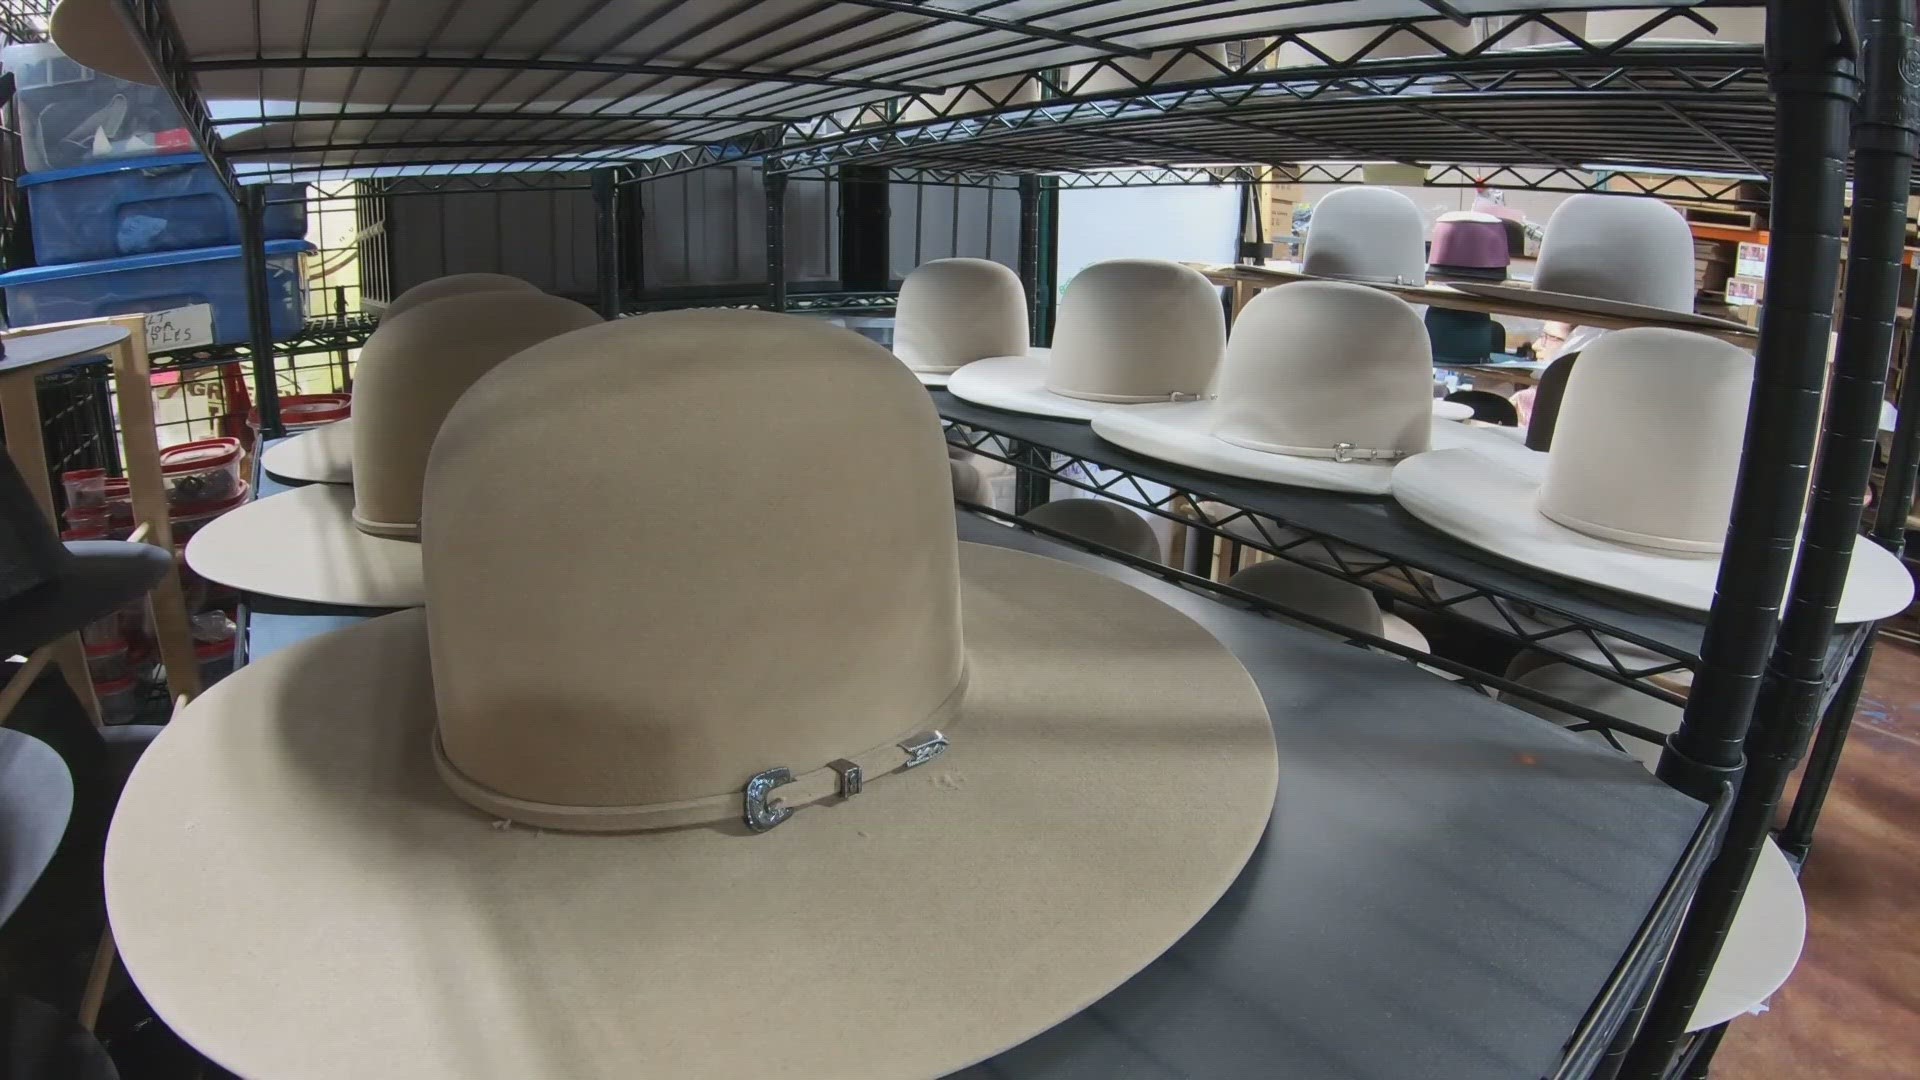 The Colorado company designed and made many of the hats for the characters in season one of “Yellowstone”.